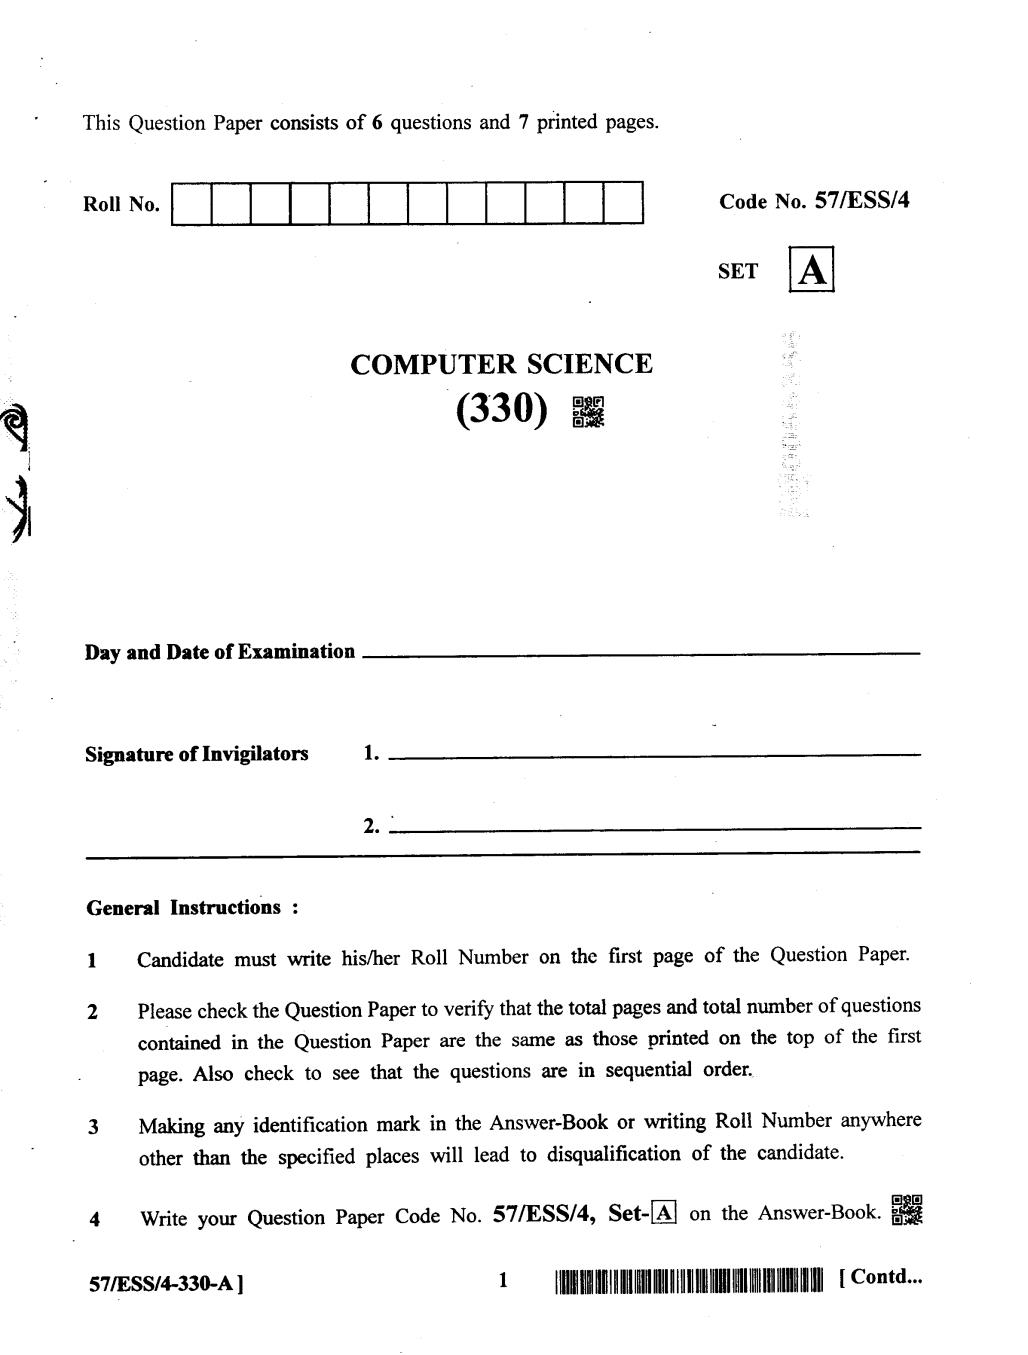 NIOS Class 12 Question Paper Oct 2018 - Computer Science - Page 1